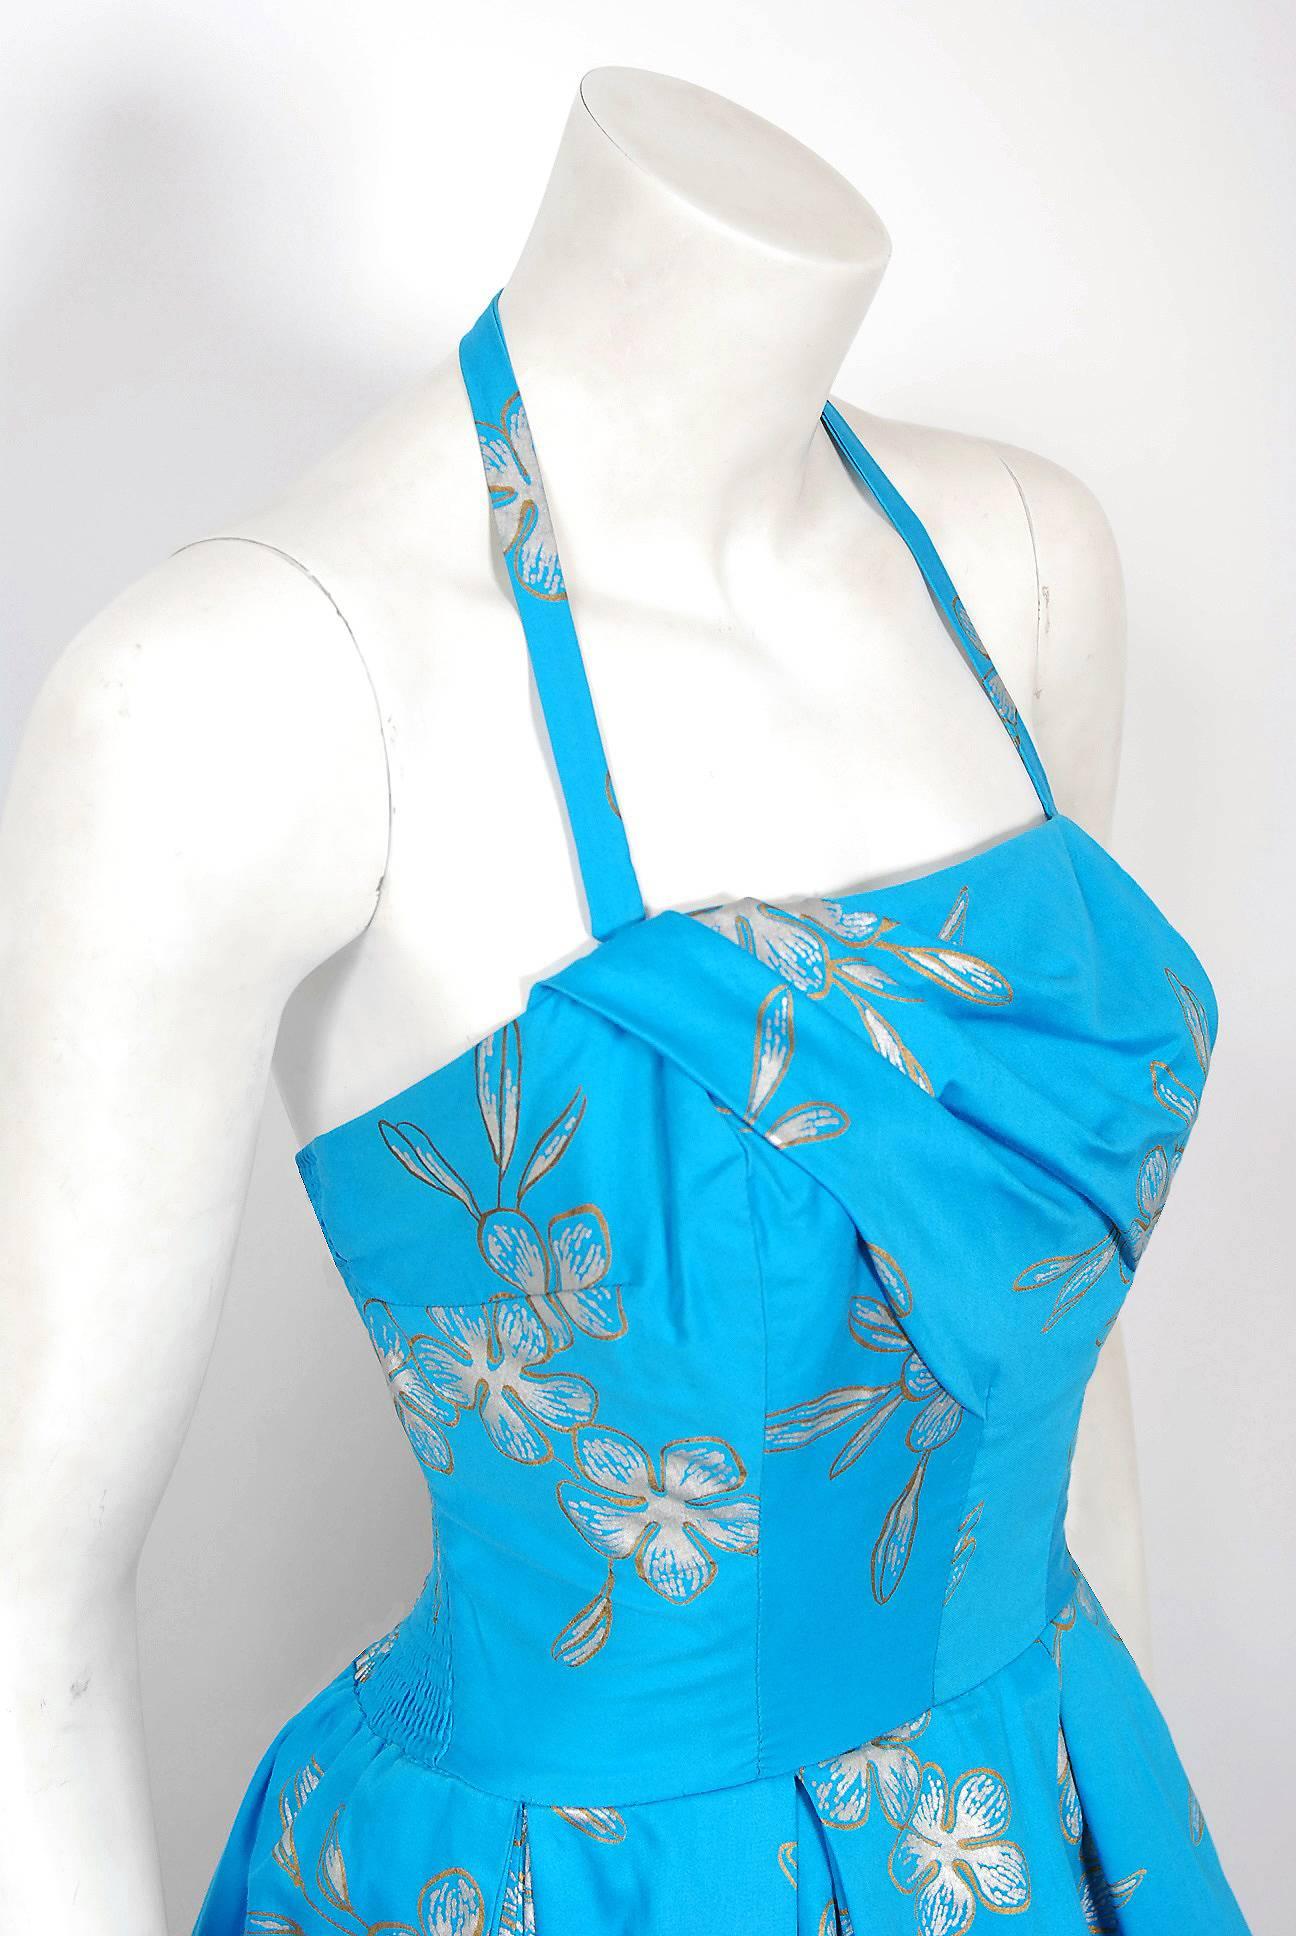 An absolutely exquisite 1950's Elsie Krassas Waikiki designer resort dress ensemble just in time for the summer season! The vibrant turquoise screen print cotton has the most breathtaking metallic silver hibiscus-floral tropical design. The bodice